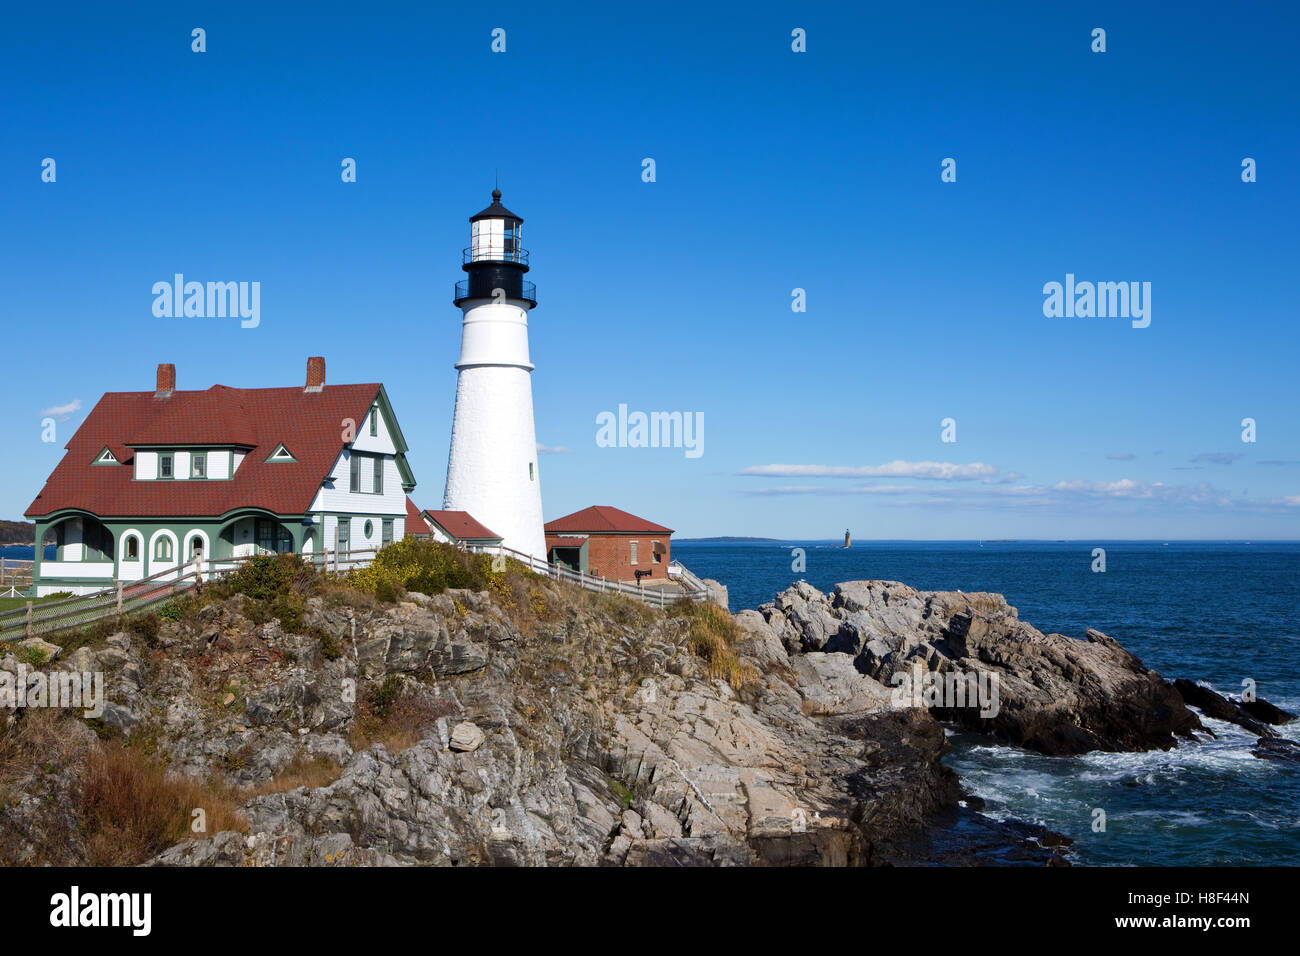 Portland Head Lighthouse is located at the entrance of Portland Harbor in Cape Elizabeth, Maine, USA. Stock Photo